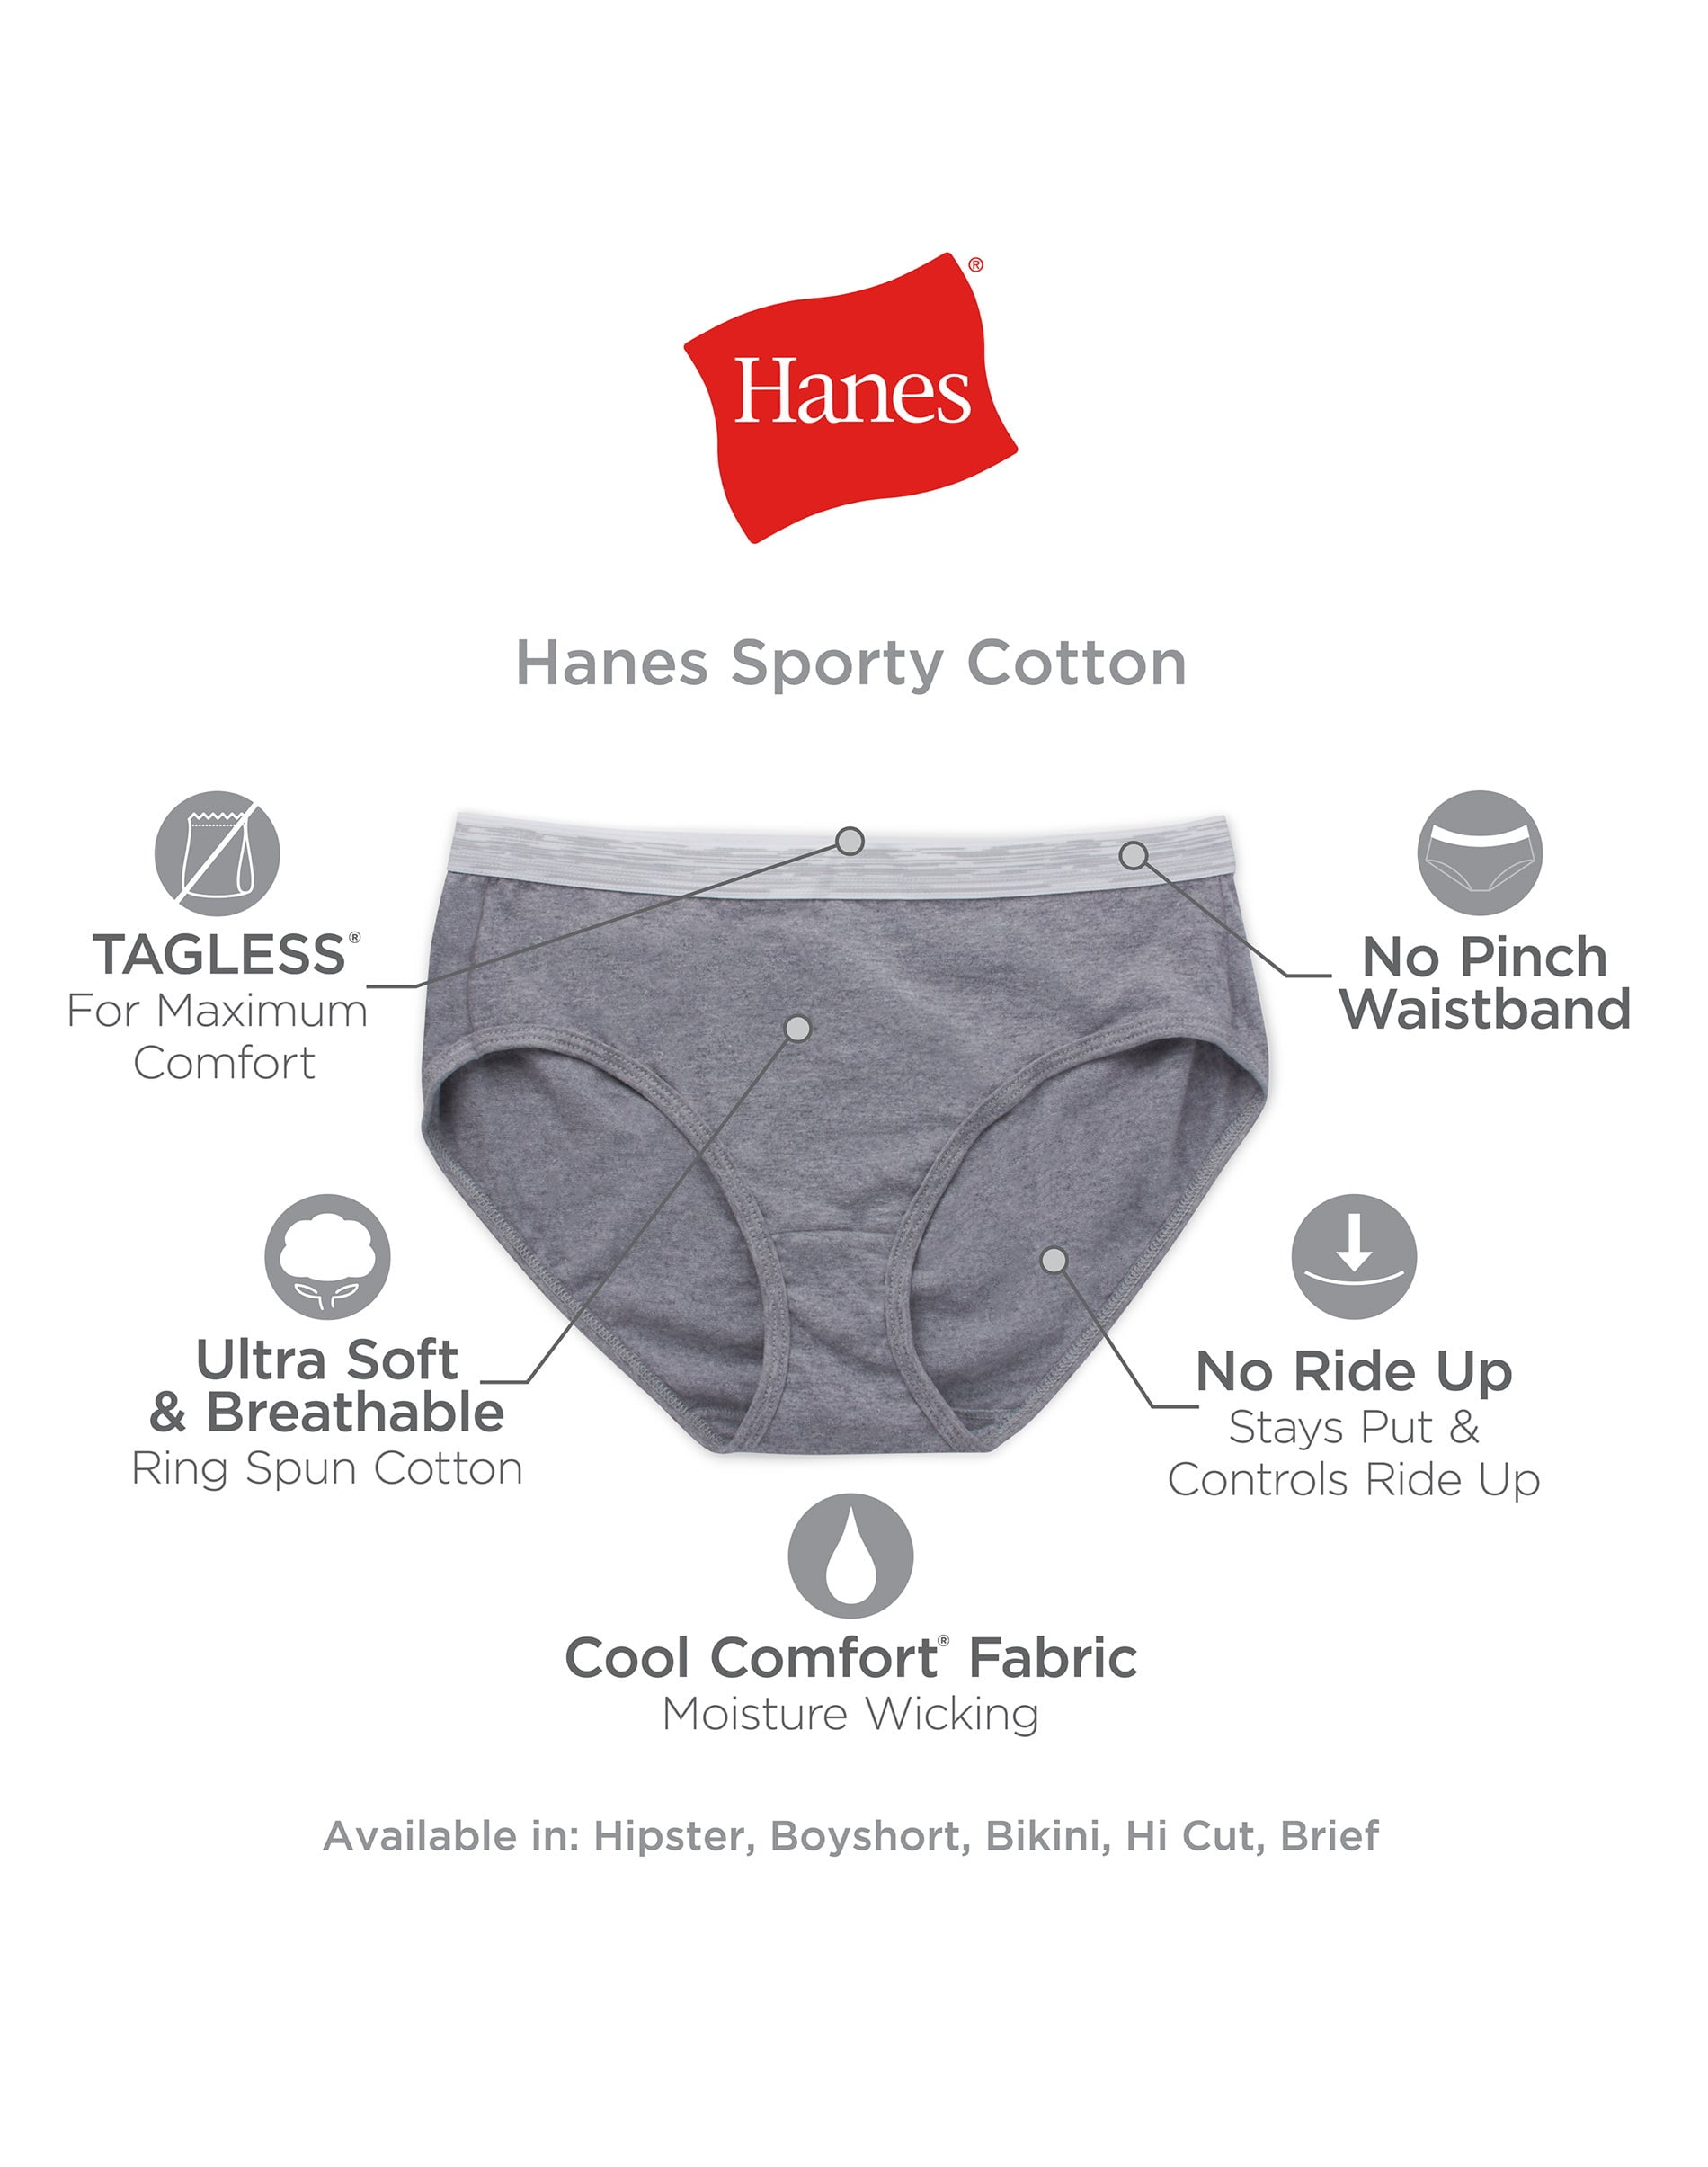 2 Packs Hanes Seamless Hipsters Size 9 No Panty Line Underwear (6 Pair  Total)